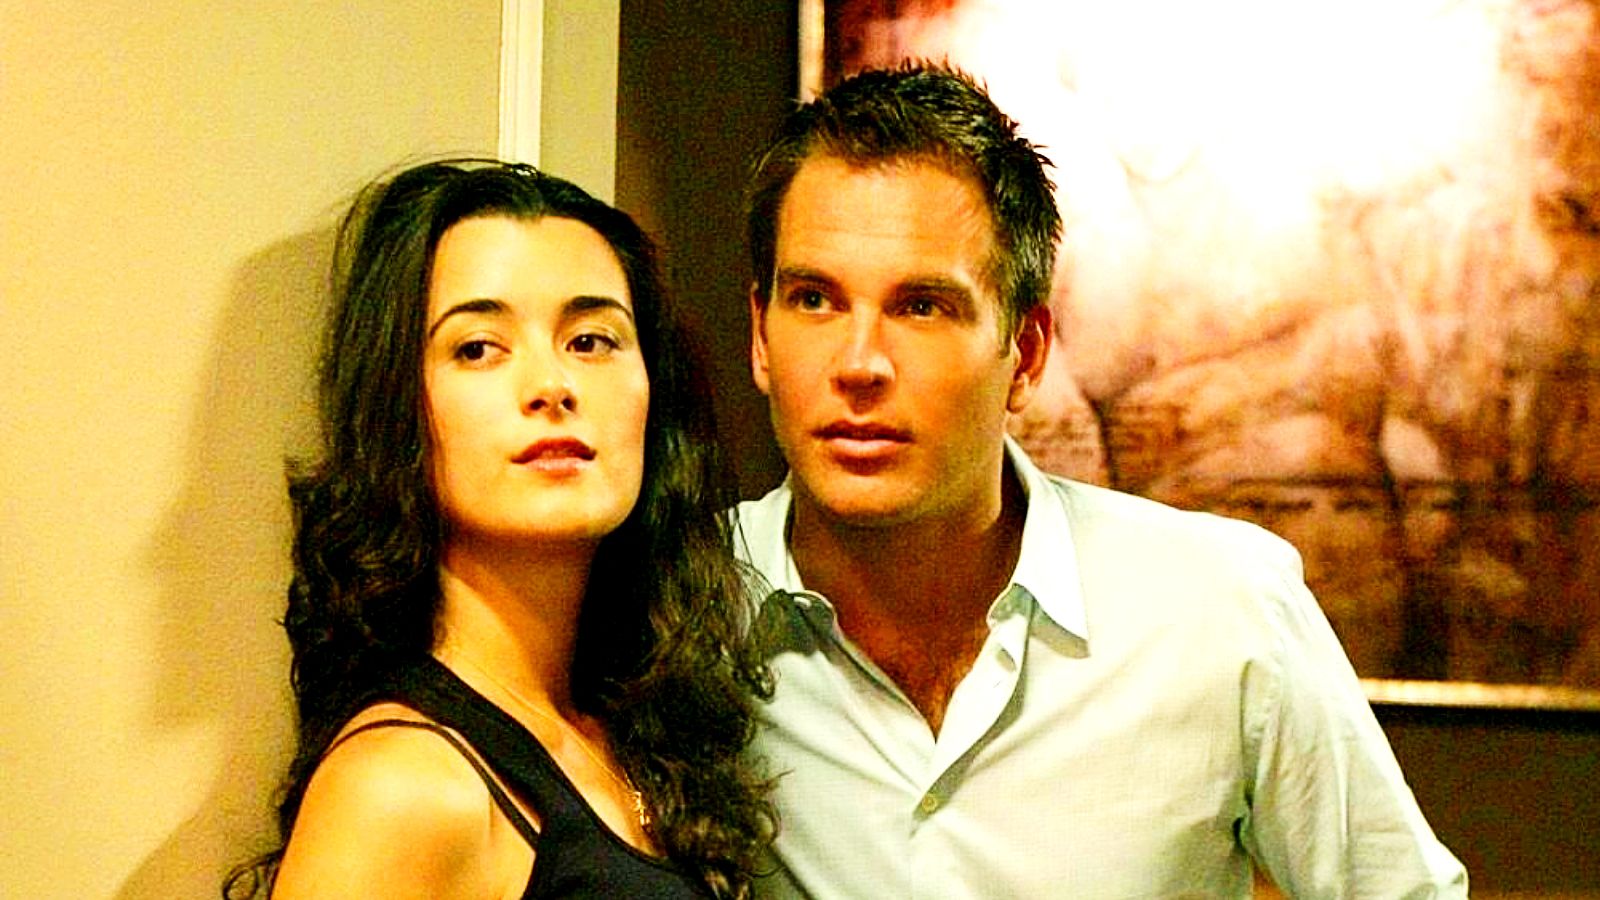 Cote de Pablo as Ziva and Michael Weatherly as DiNozzo in NCIS